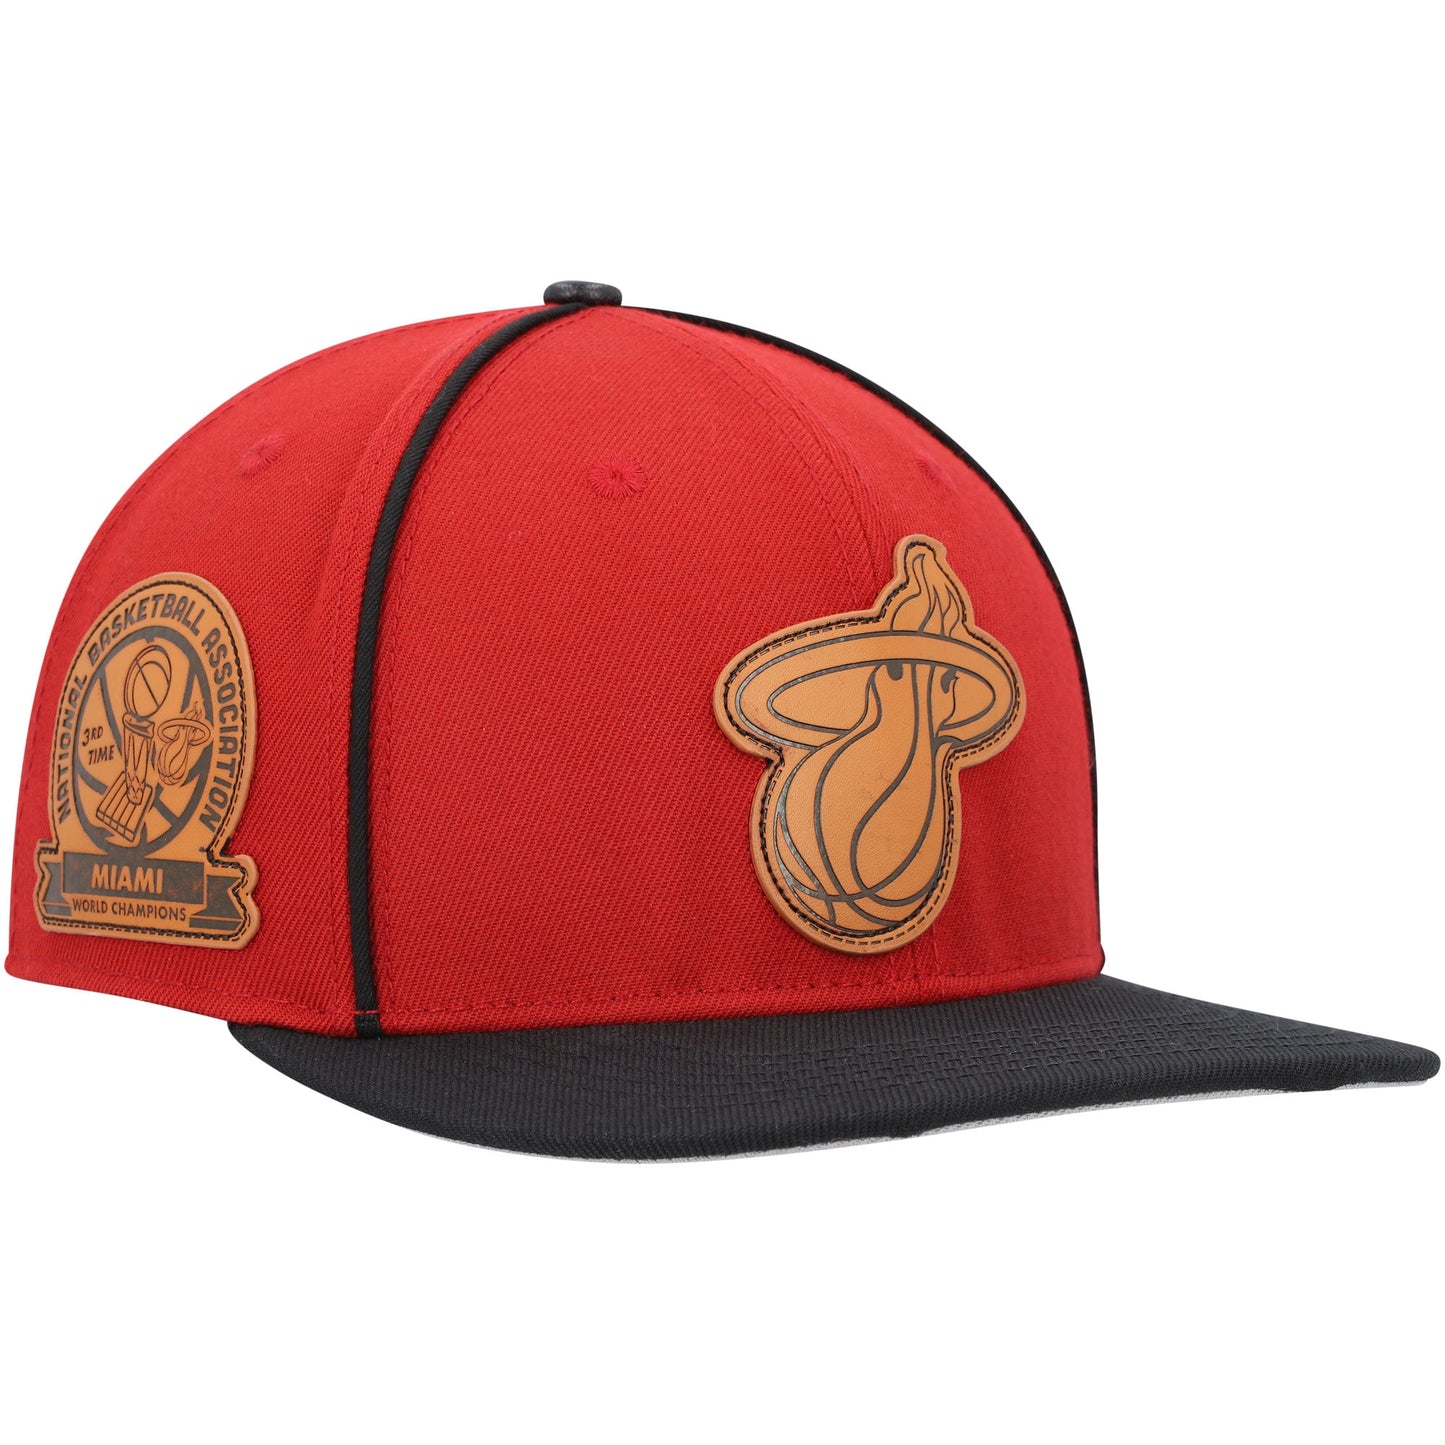 Miami Heat Pro Standard Heritage Leather Patch Snapback Hat - Red/Black